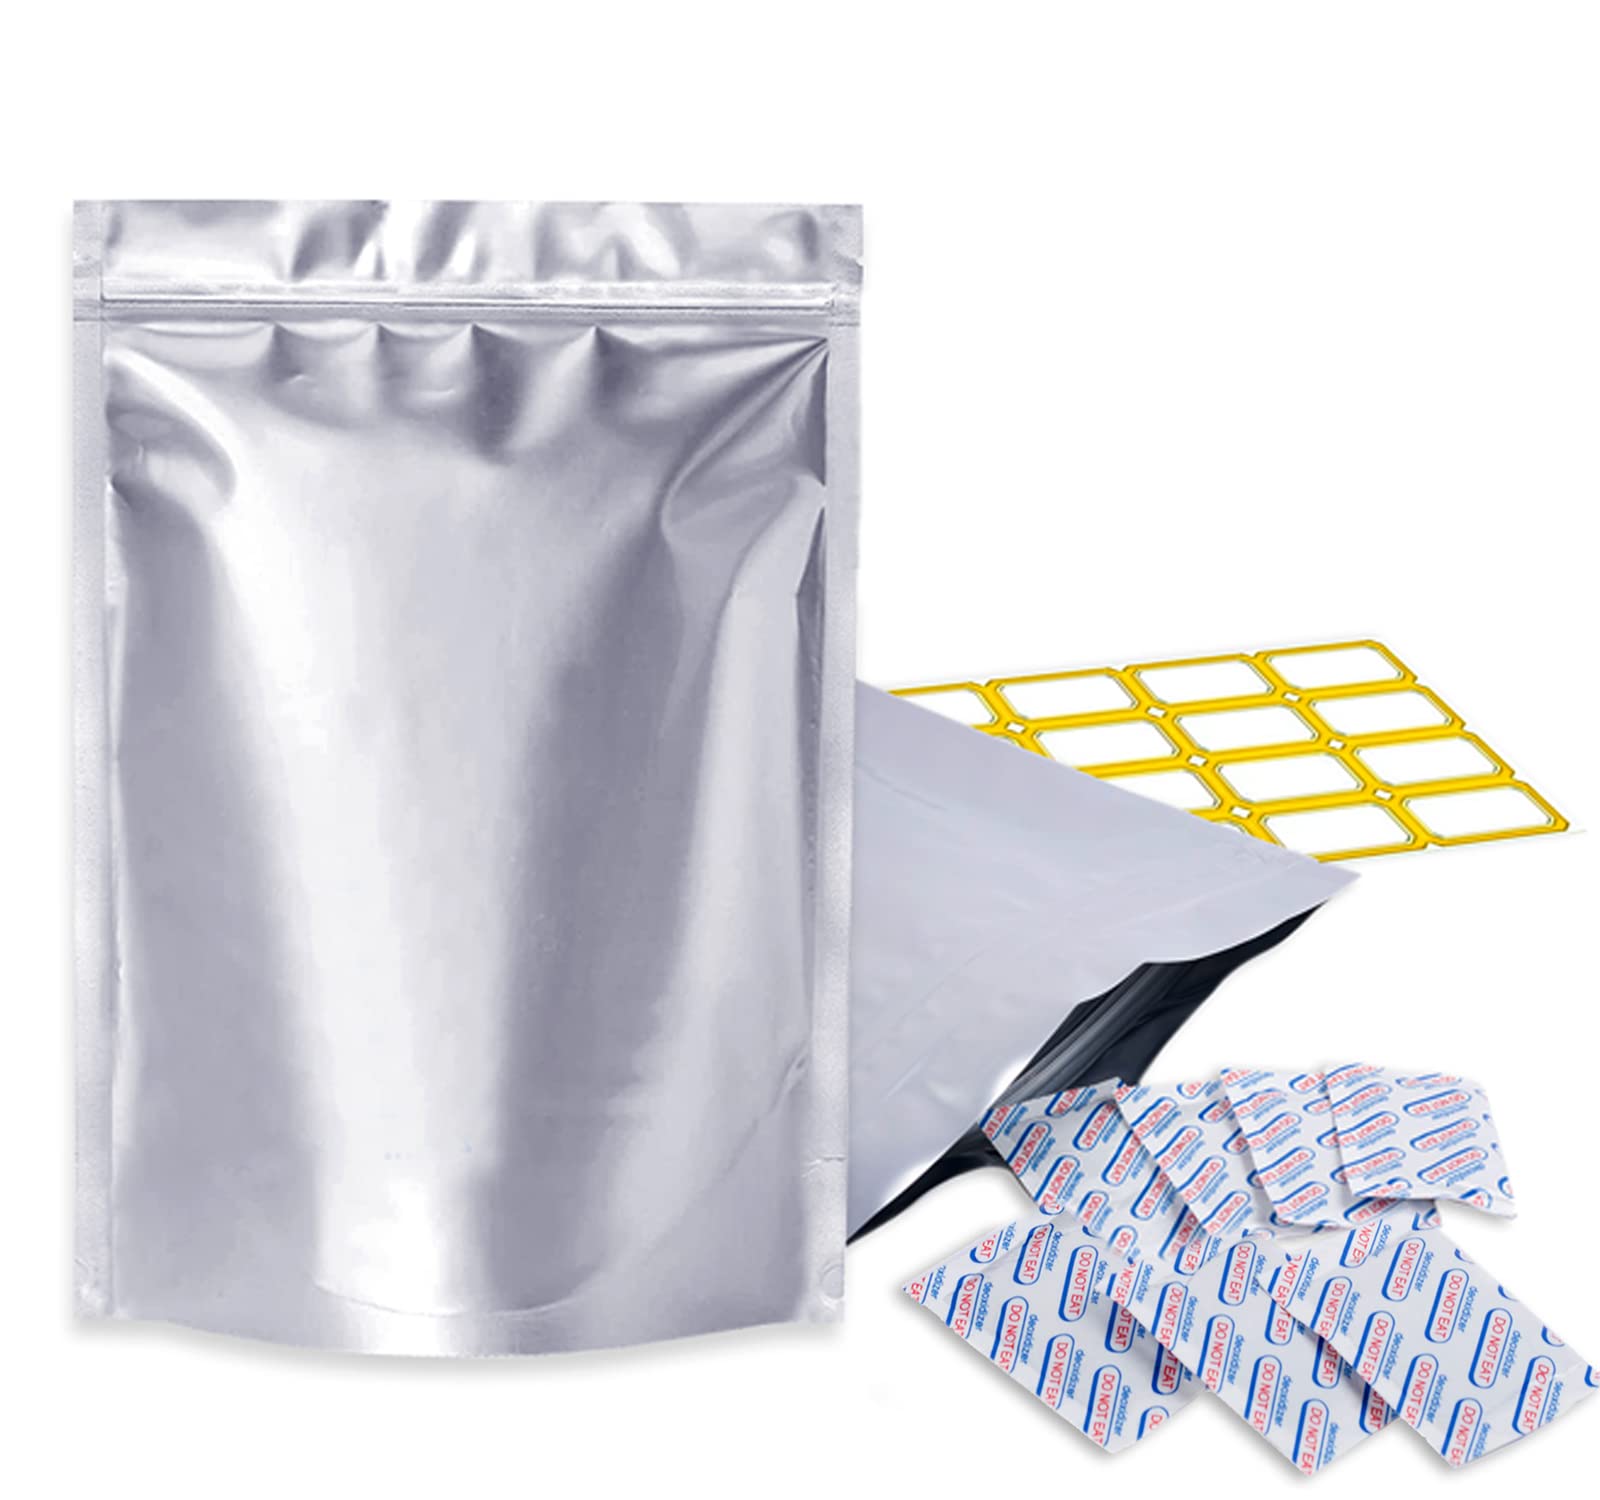 100 pcs Mylar Bags 1 Gallon Smell Proof 10 Mil Thick with Oxygen Absorbers 500CC, Resealable, Food Grade, Leak Proof, Air-Tight- USA Co.